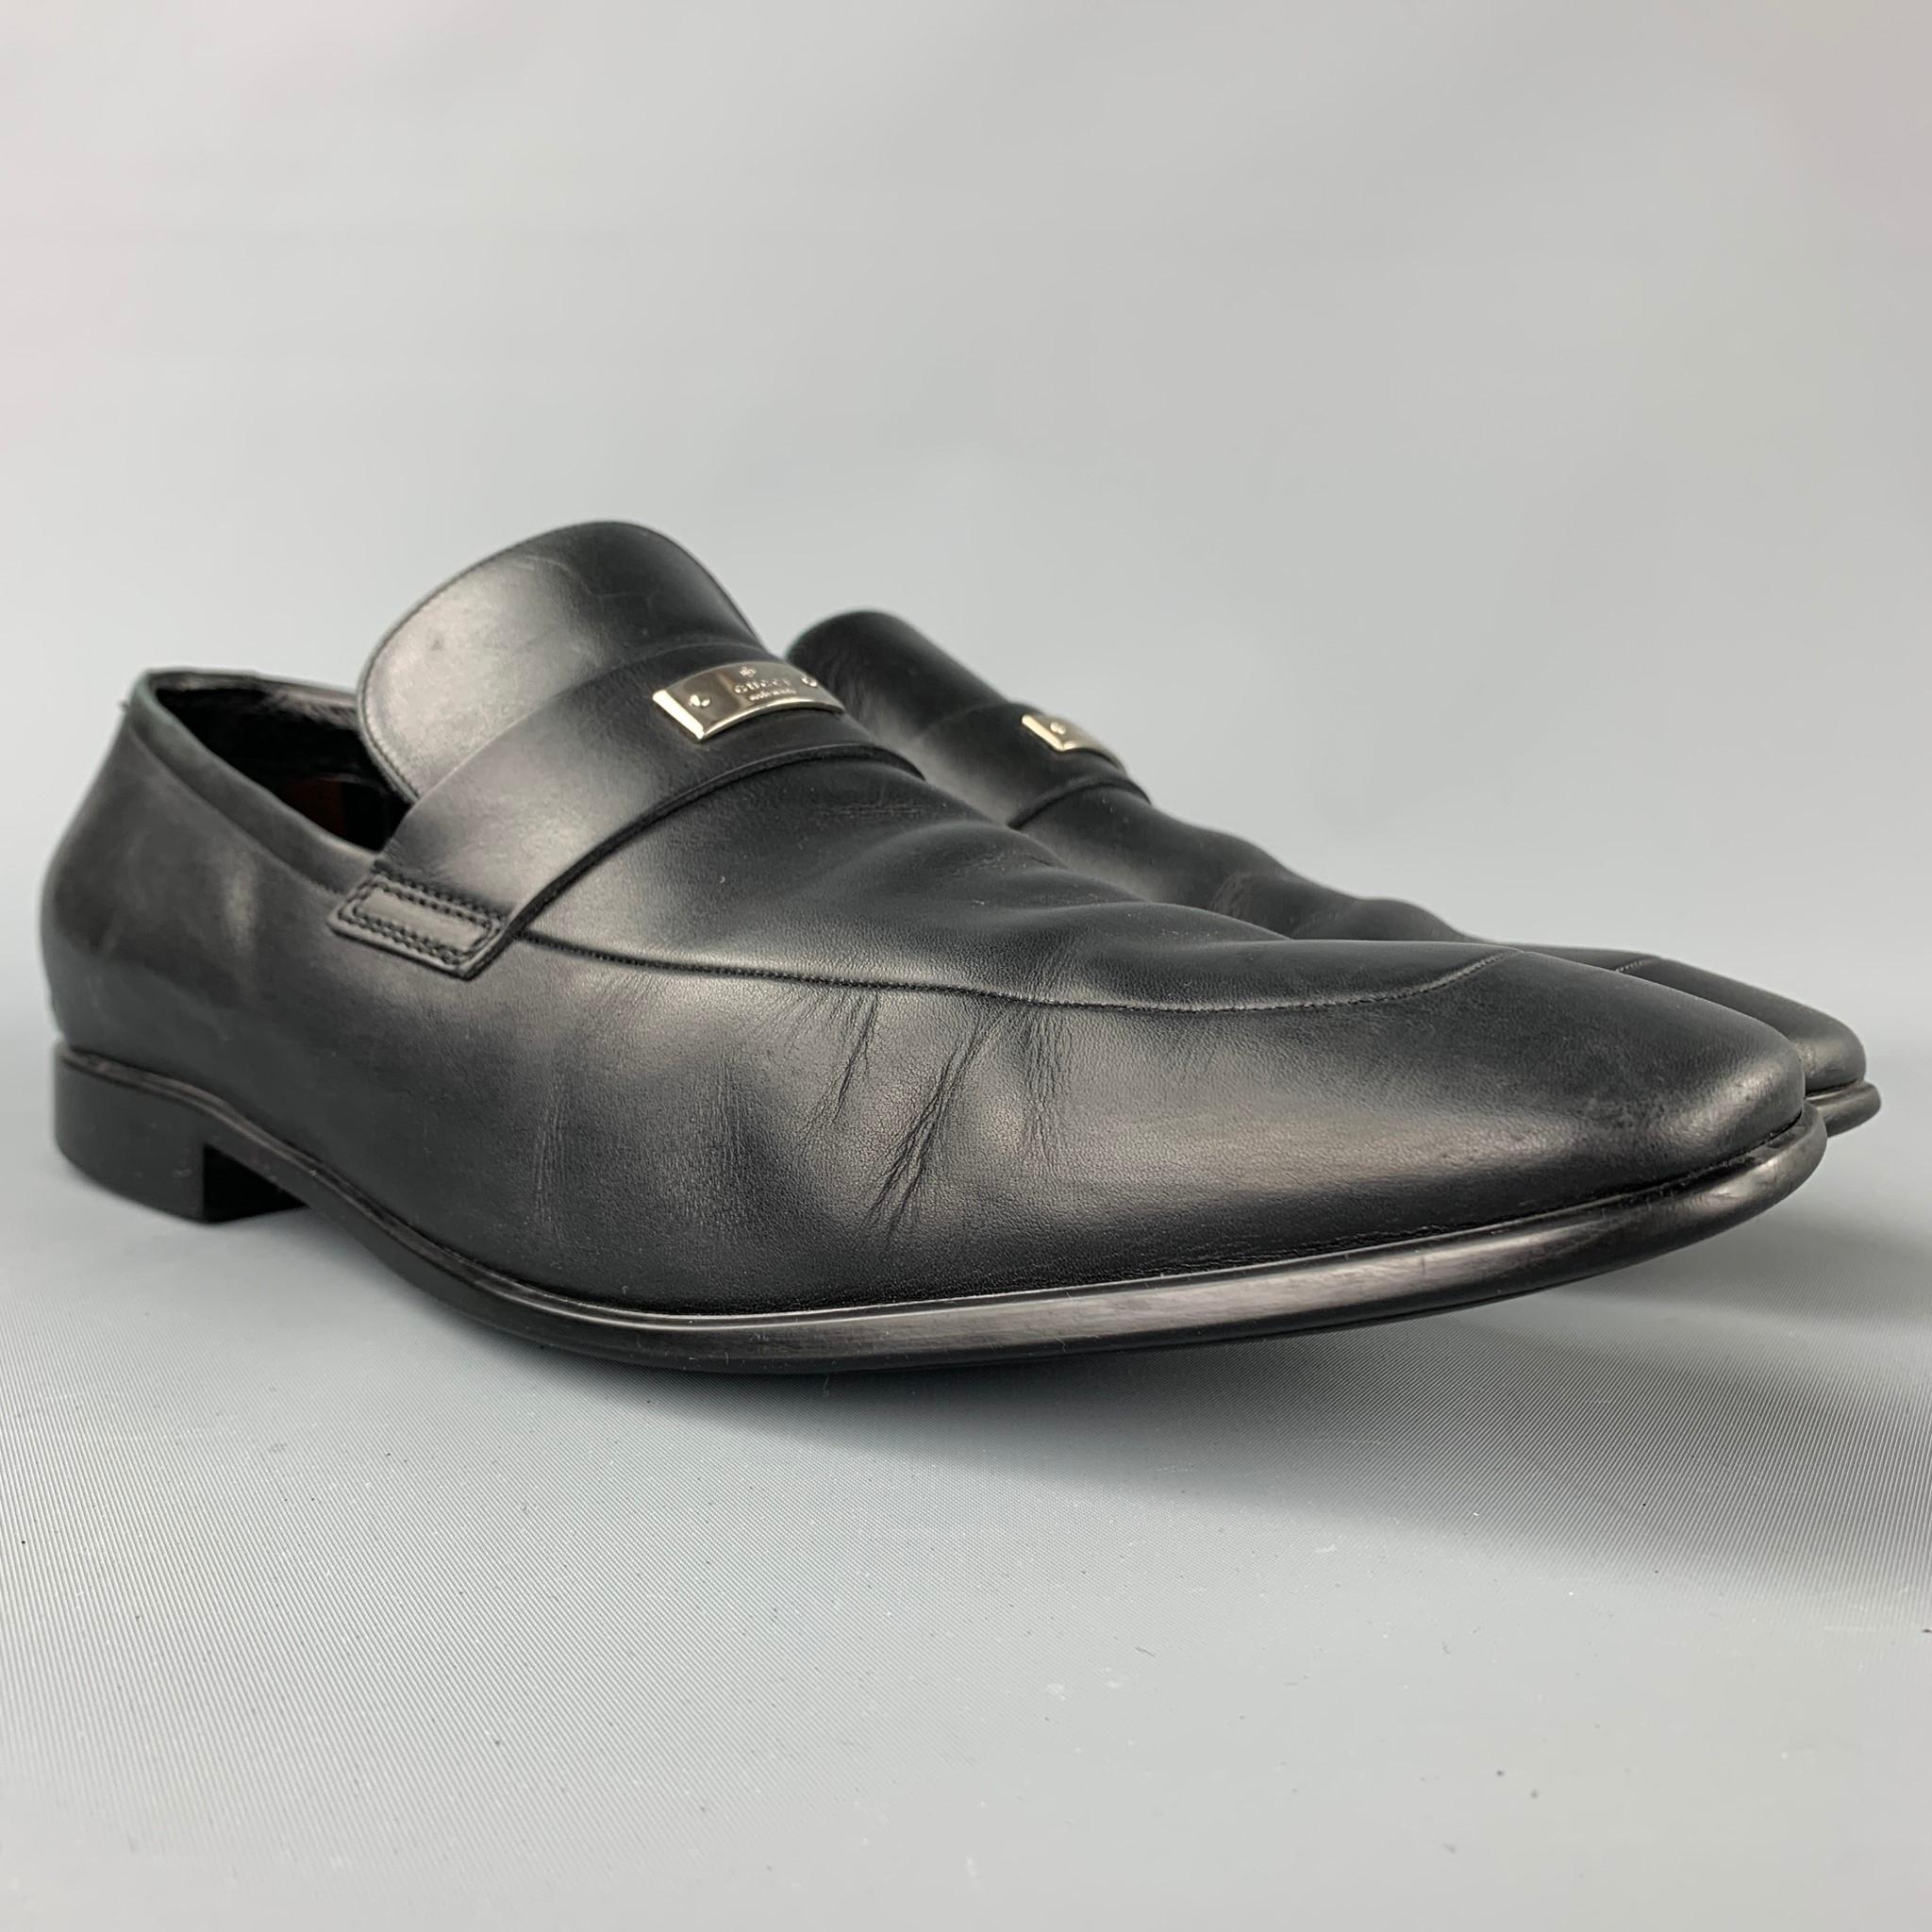 GUCCI loafers comes in a black leather with a silver tone logo detail featuring a slip on style, square toe, and a rubber sole. Made in Italy.

Good Pre-Owned Condition.
Marked: 147524 10.5 D

Outsole: 12 in. x 4 in. 